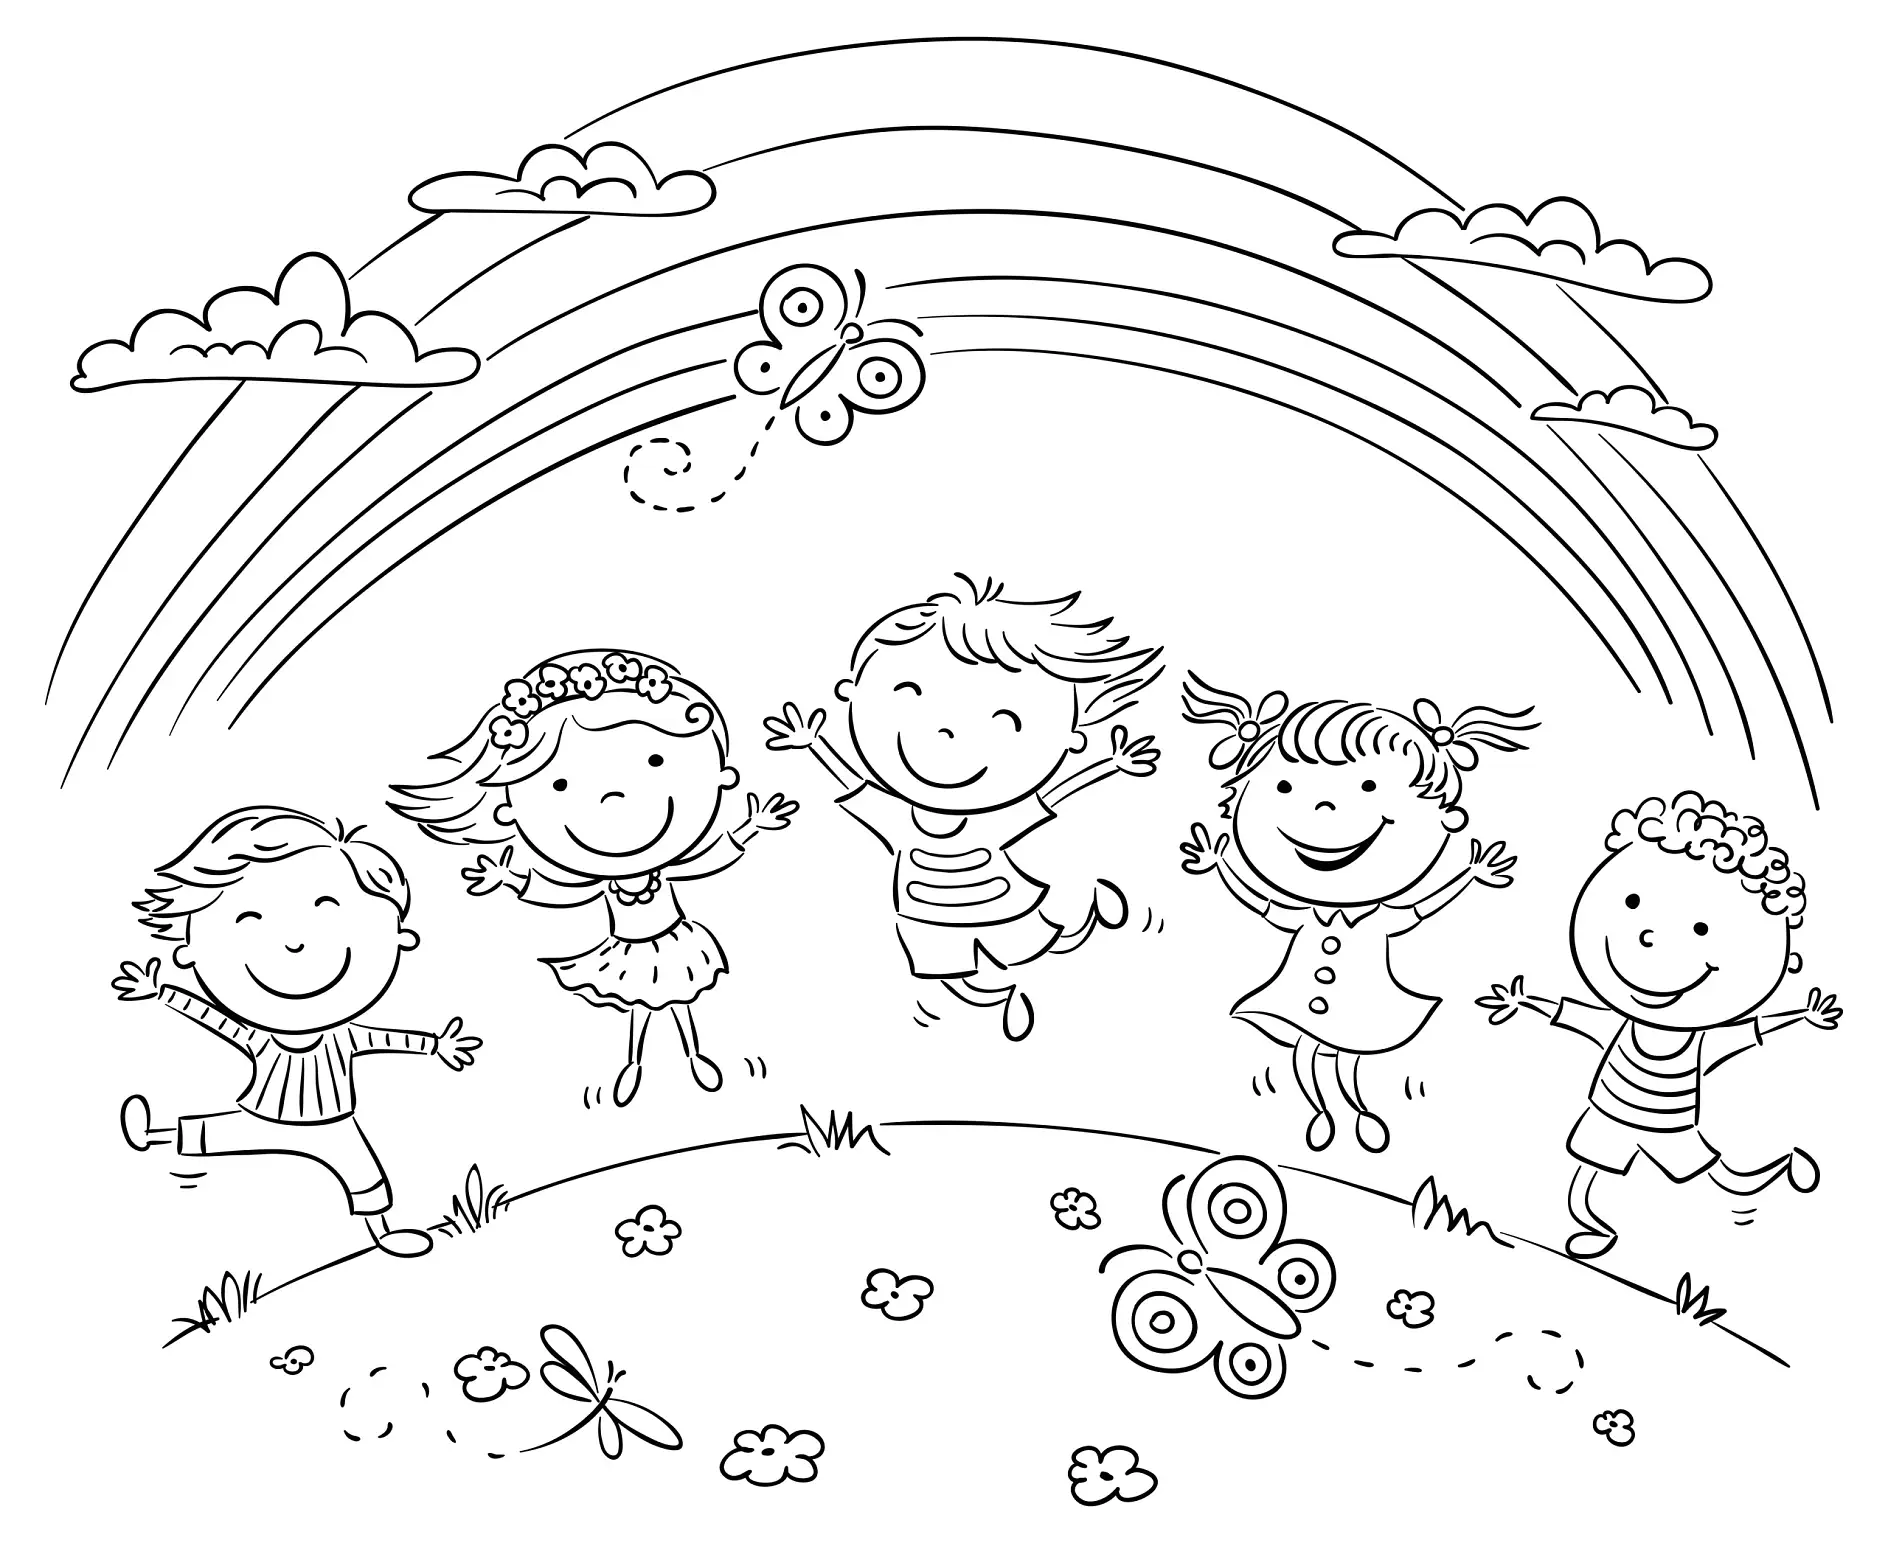 Kids jumping with joy on a hill under rainbow, black and white outline